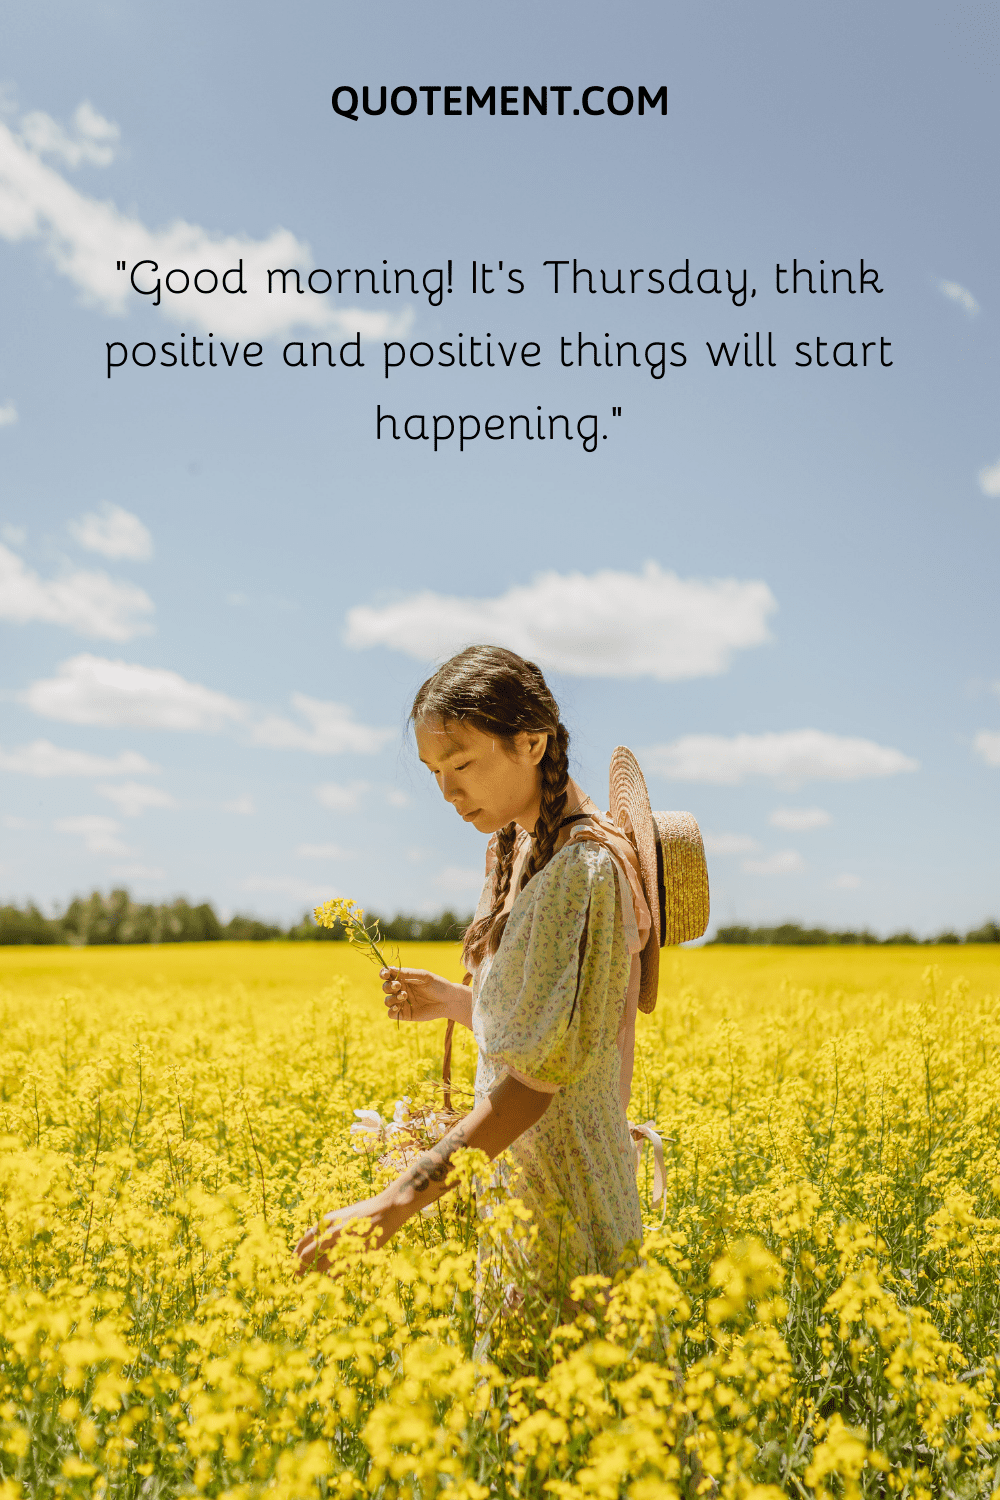 It’s Thursday, think positive and positive things will start happening.